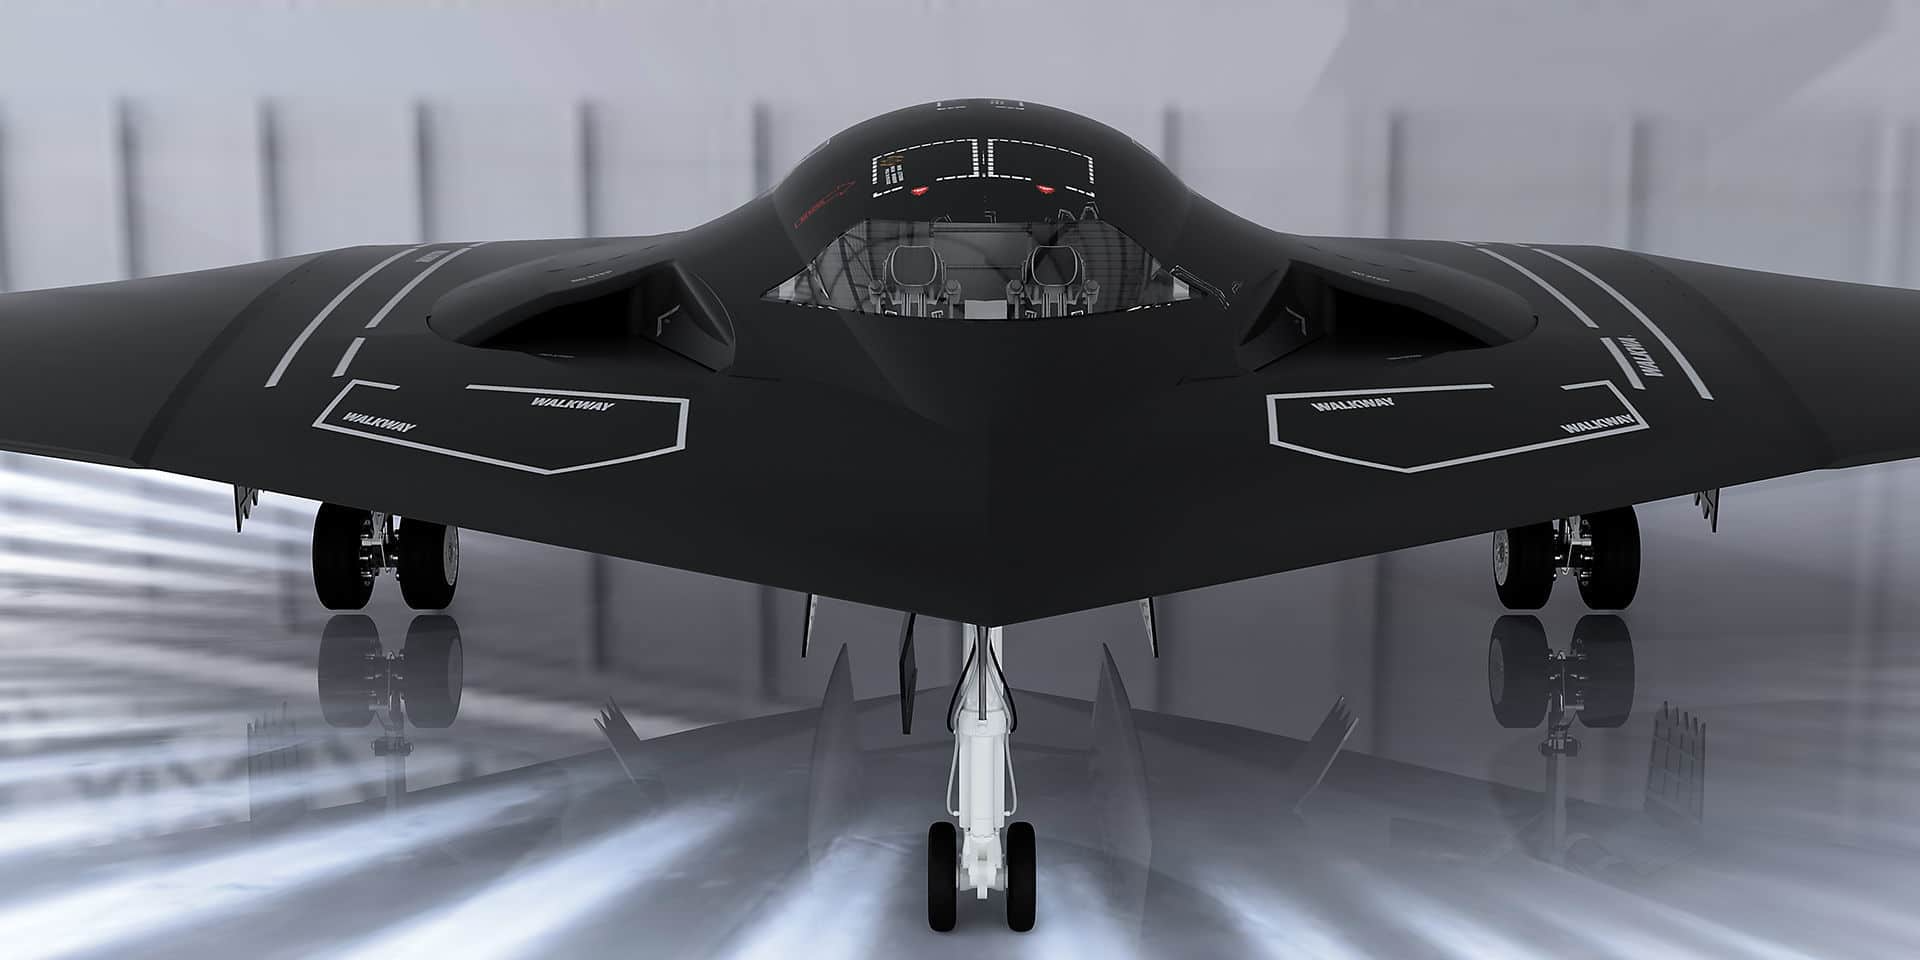 Pleasure is expensive, but doubtful. "For" and "against" the aircraft of the 6th generation B-21